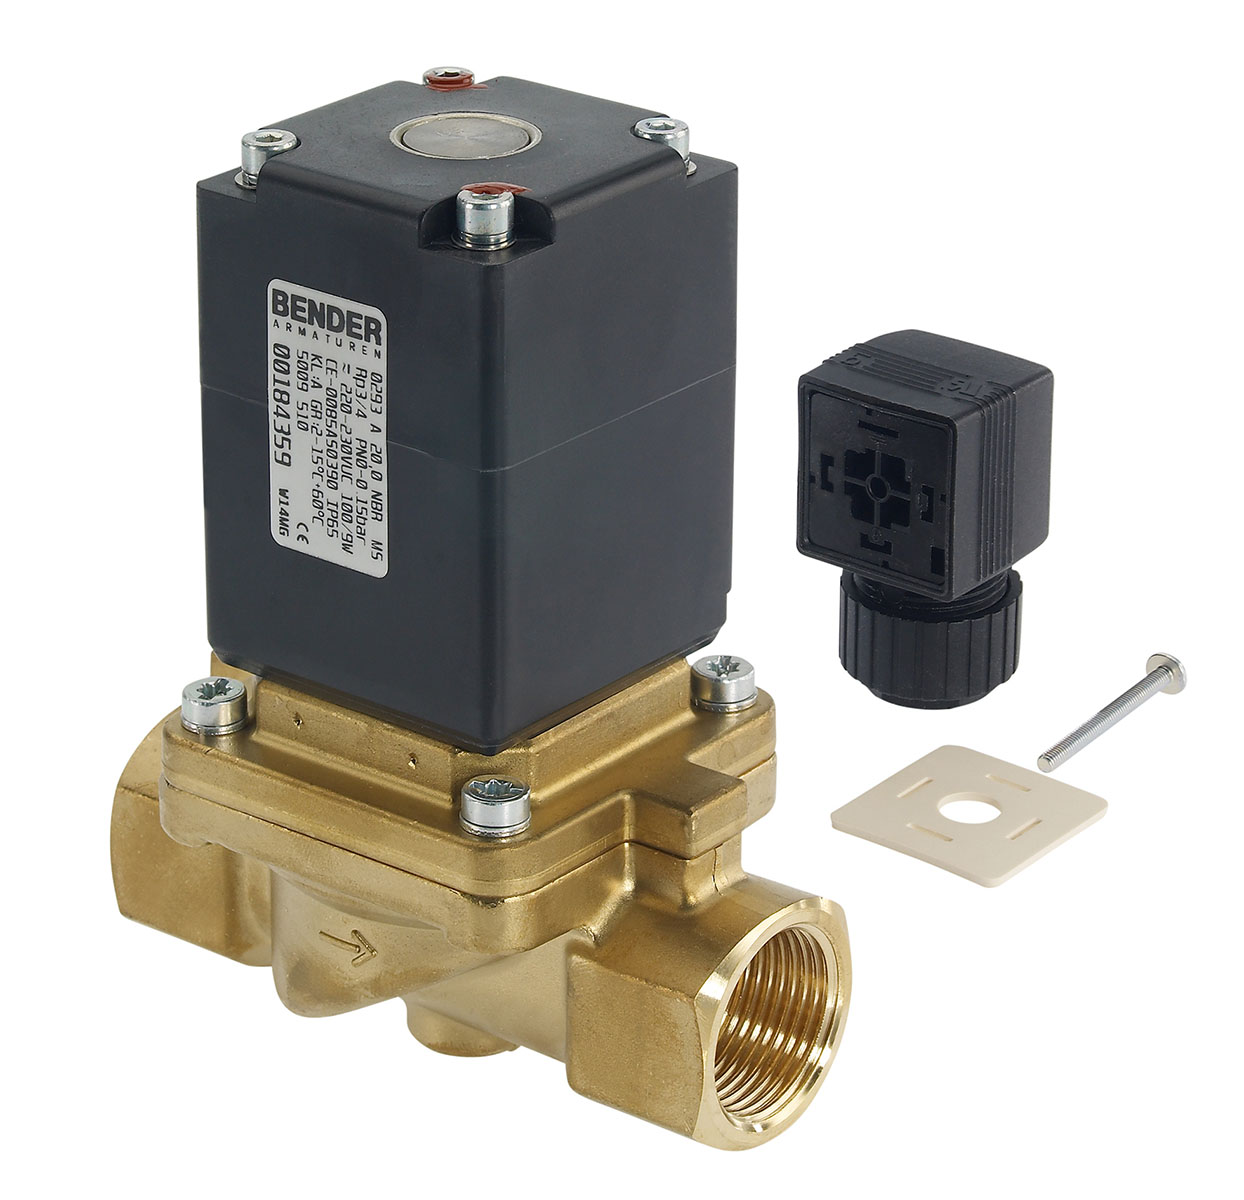 5009520 - 2/2 way solenoid valve normally closed for flammable gas, DIN-DVGW certified for gas Type 4; female thread